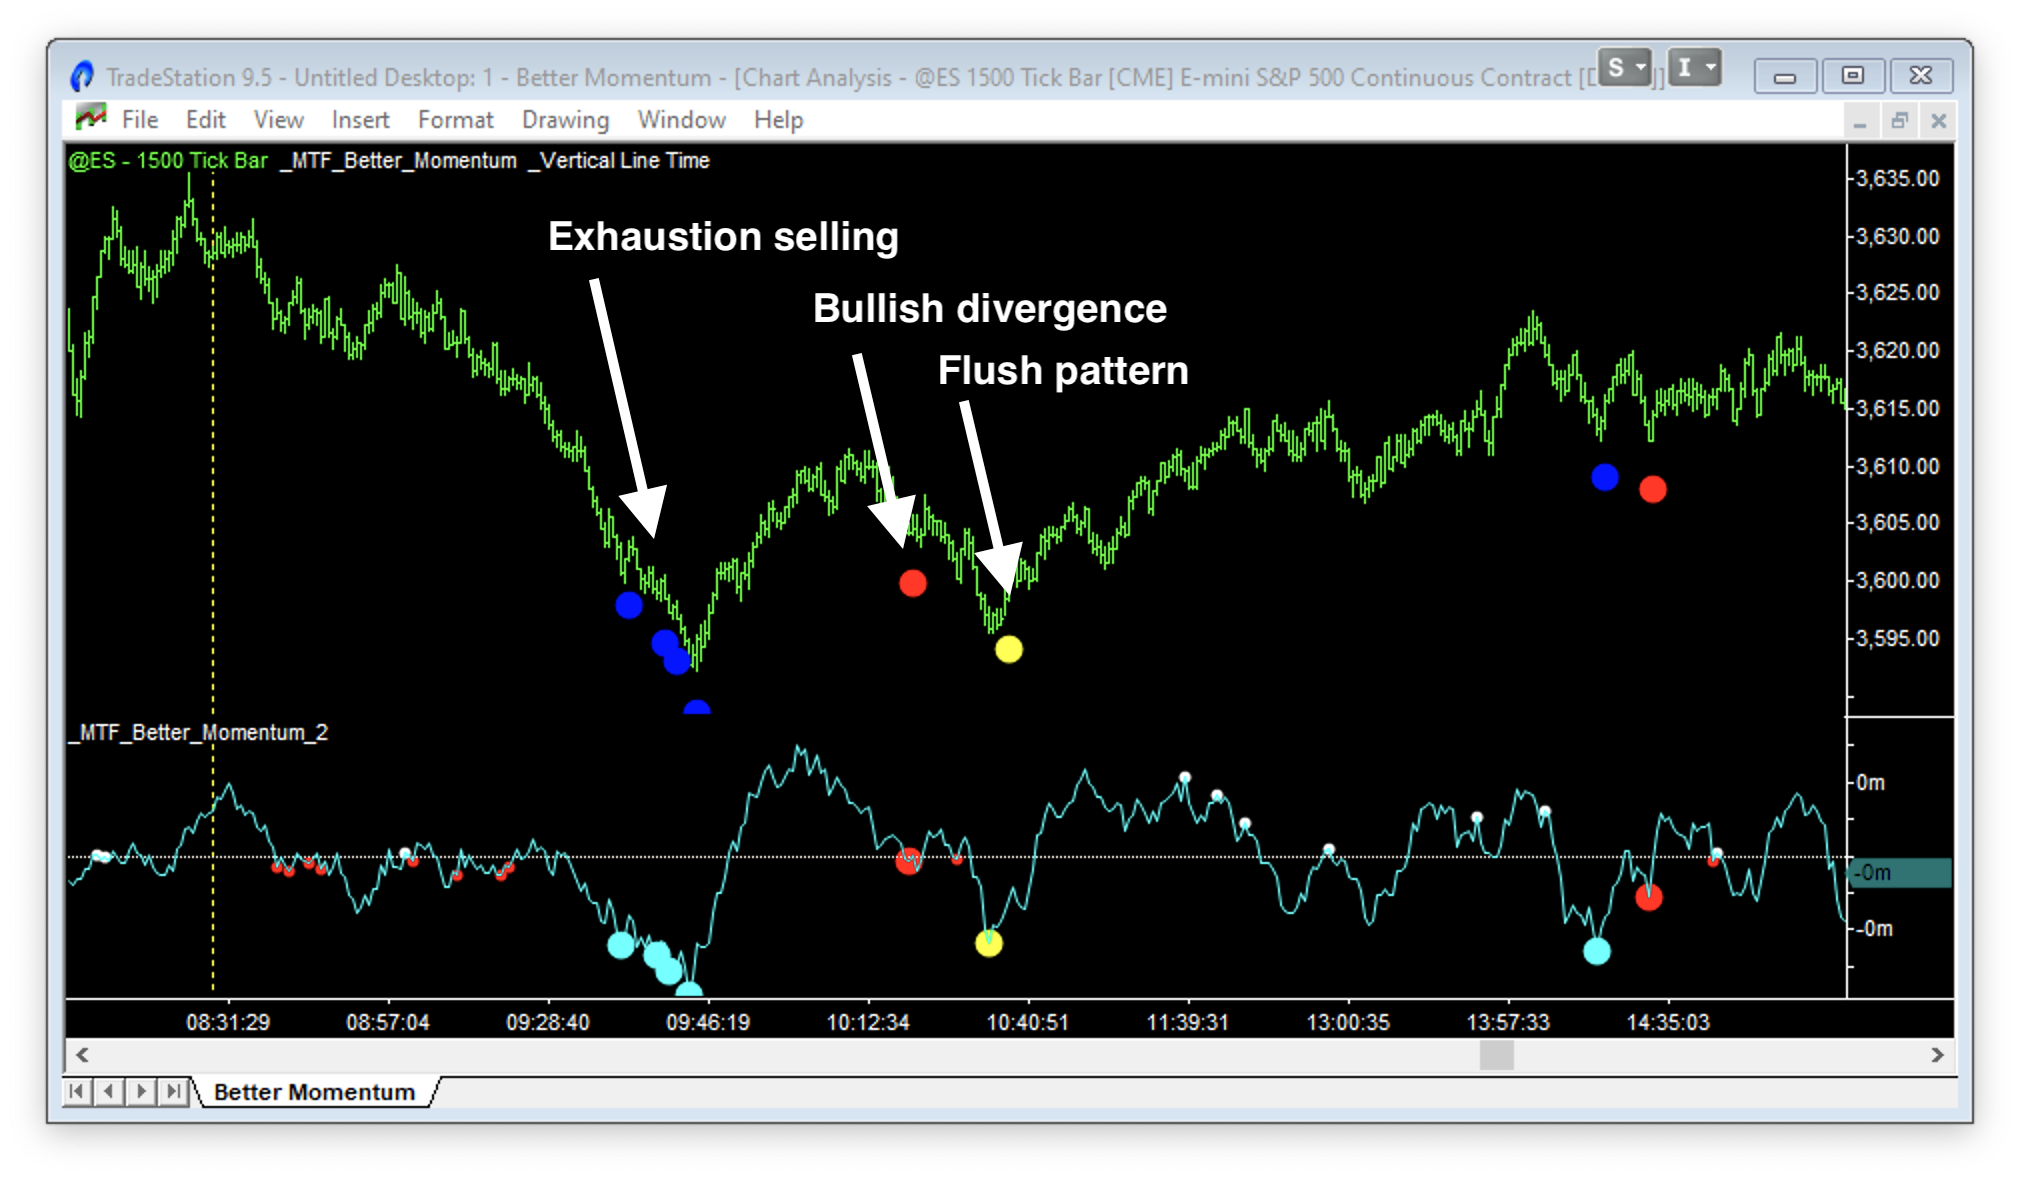 Better Momentum indicator at a bottom showing Exhaustion, Divergence and Flush patterns